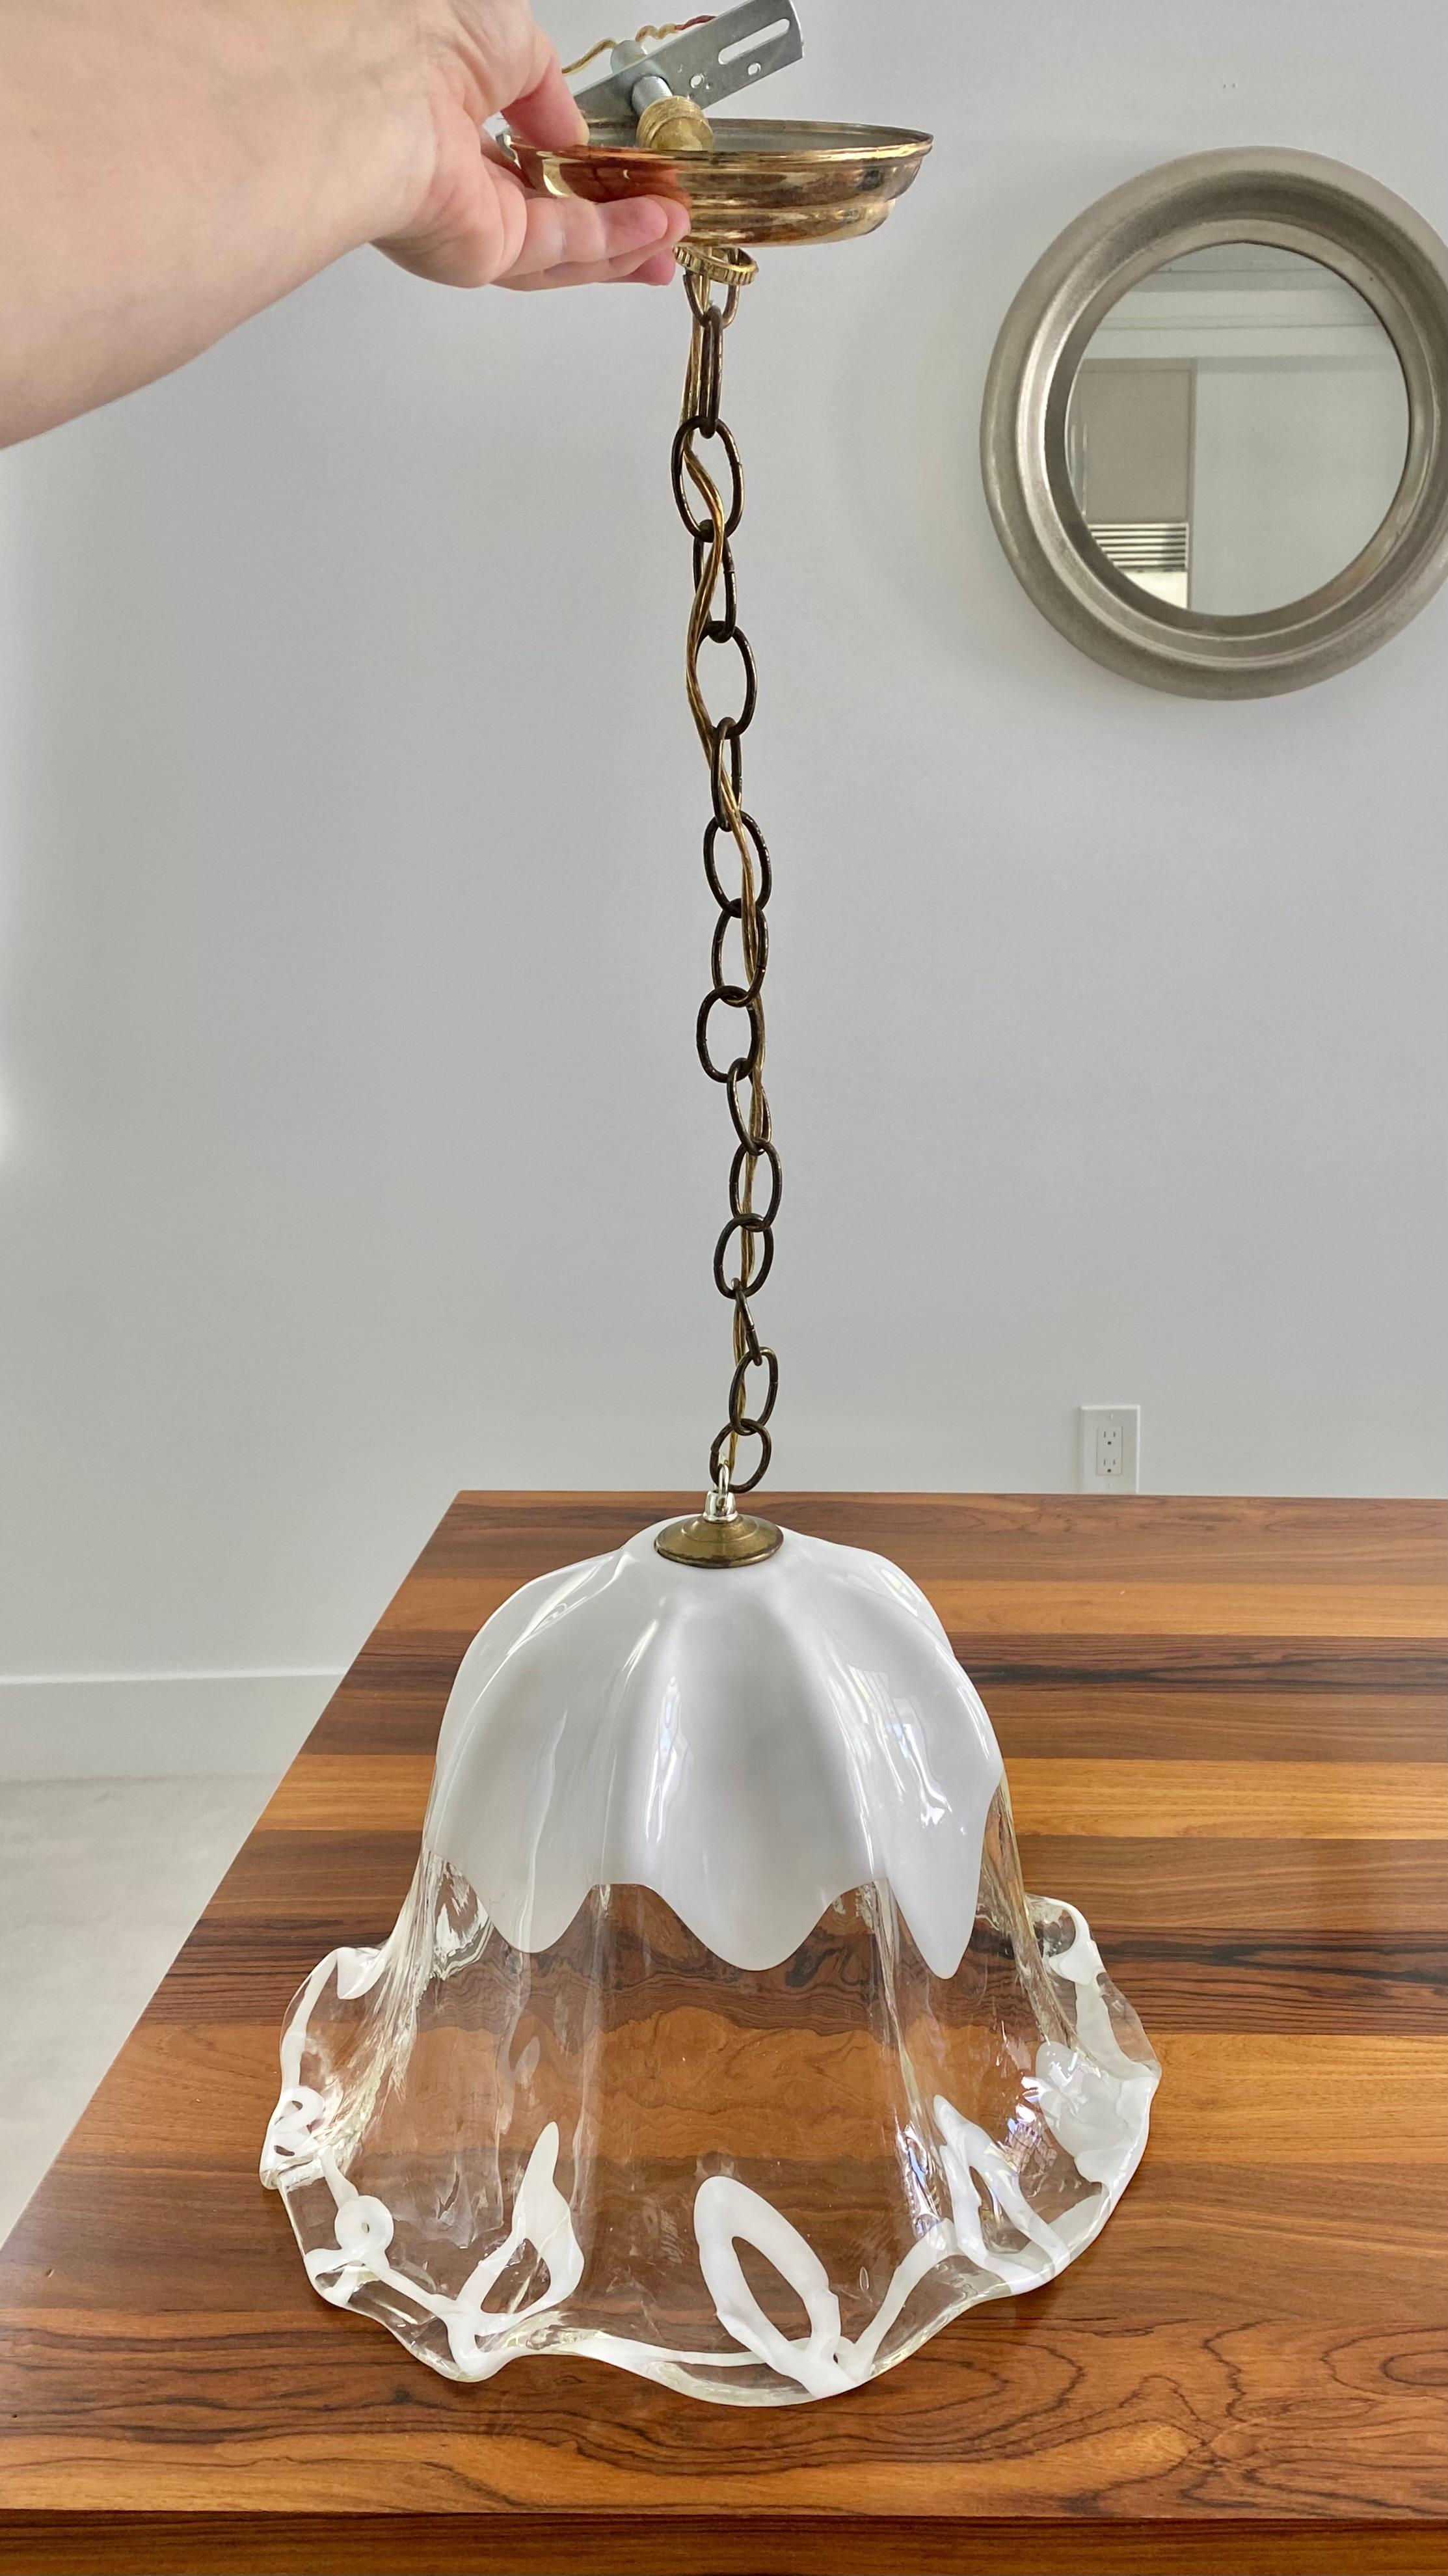 One of a kind, large transparent glass tulip pendant lamp in Italian Murano glass by famed maker AV Mazzega, circa 1970s.

Handmade piece with ribbons of white art glass that dance across the fluted edges of this substantial, yet delicate piece. The